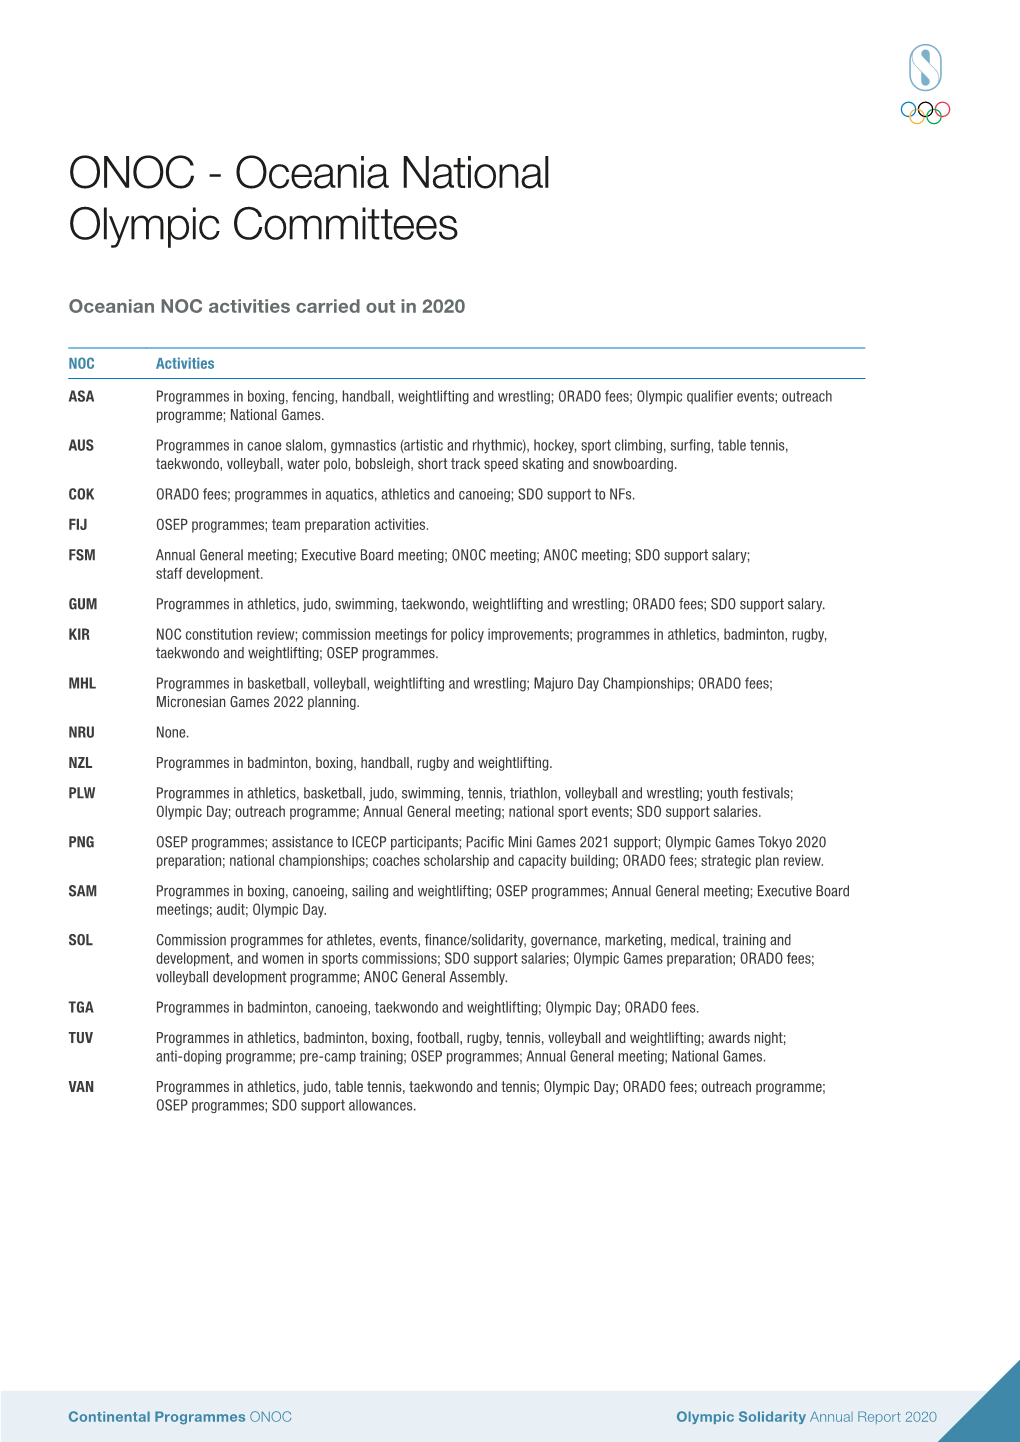 ONOC - Oceania National Olympic Committees